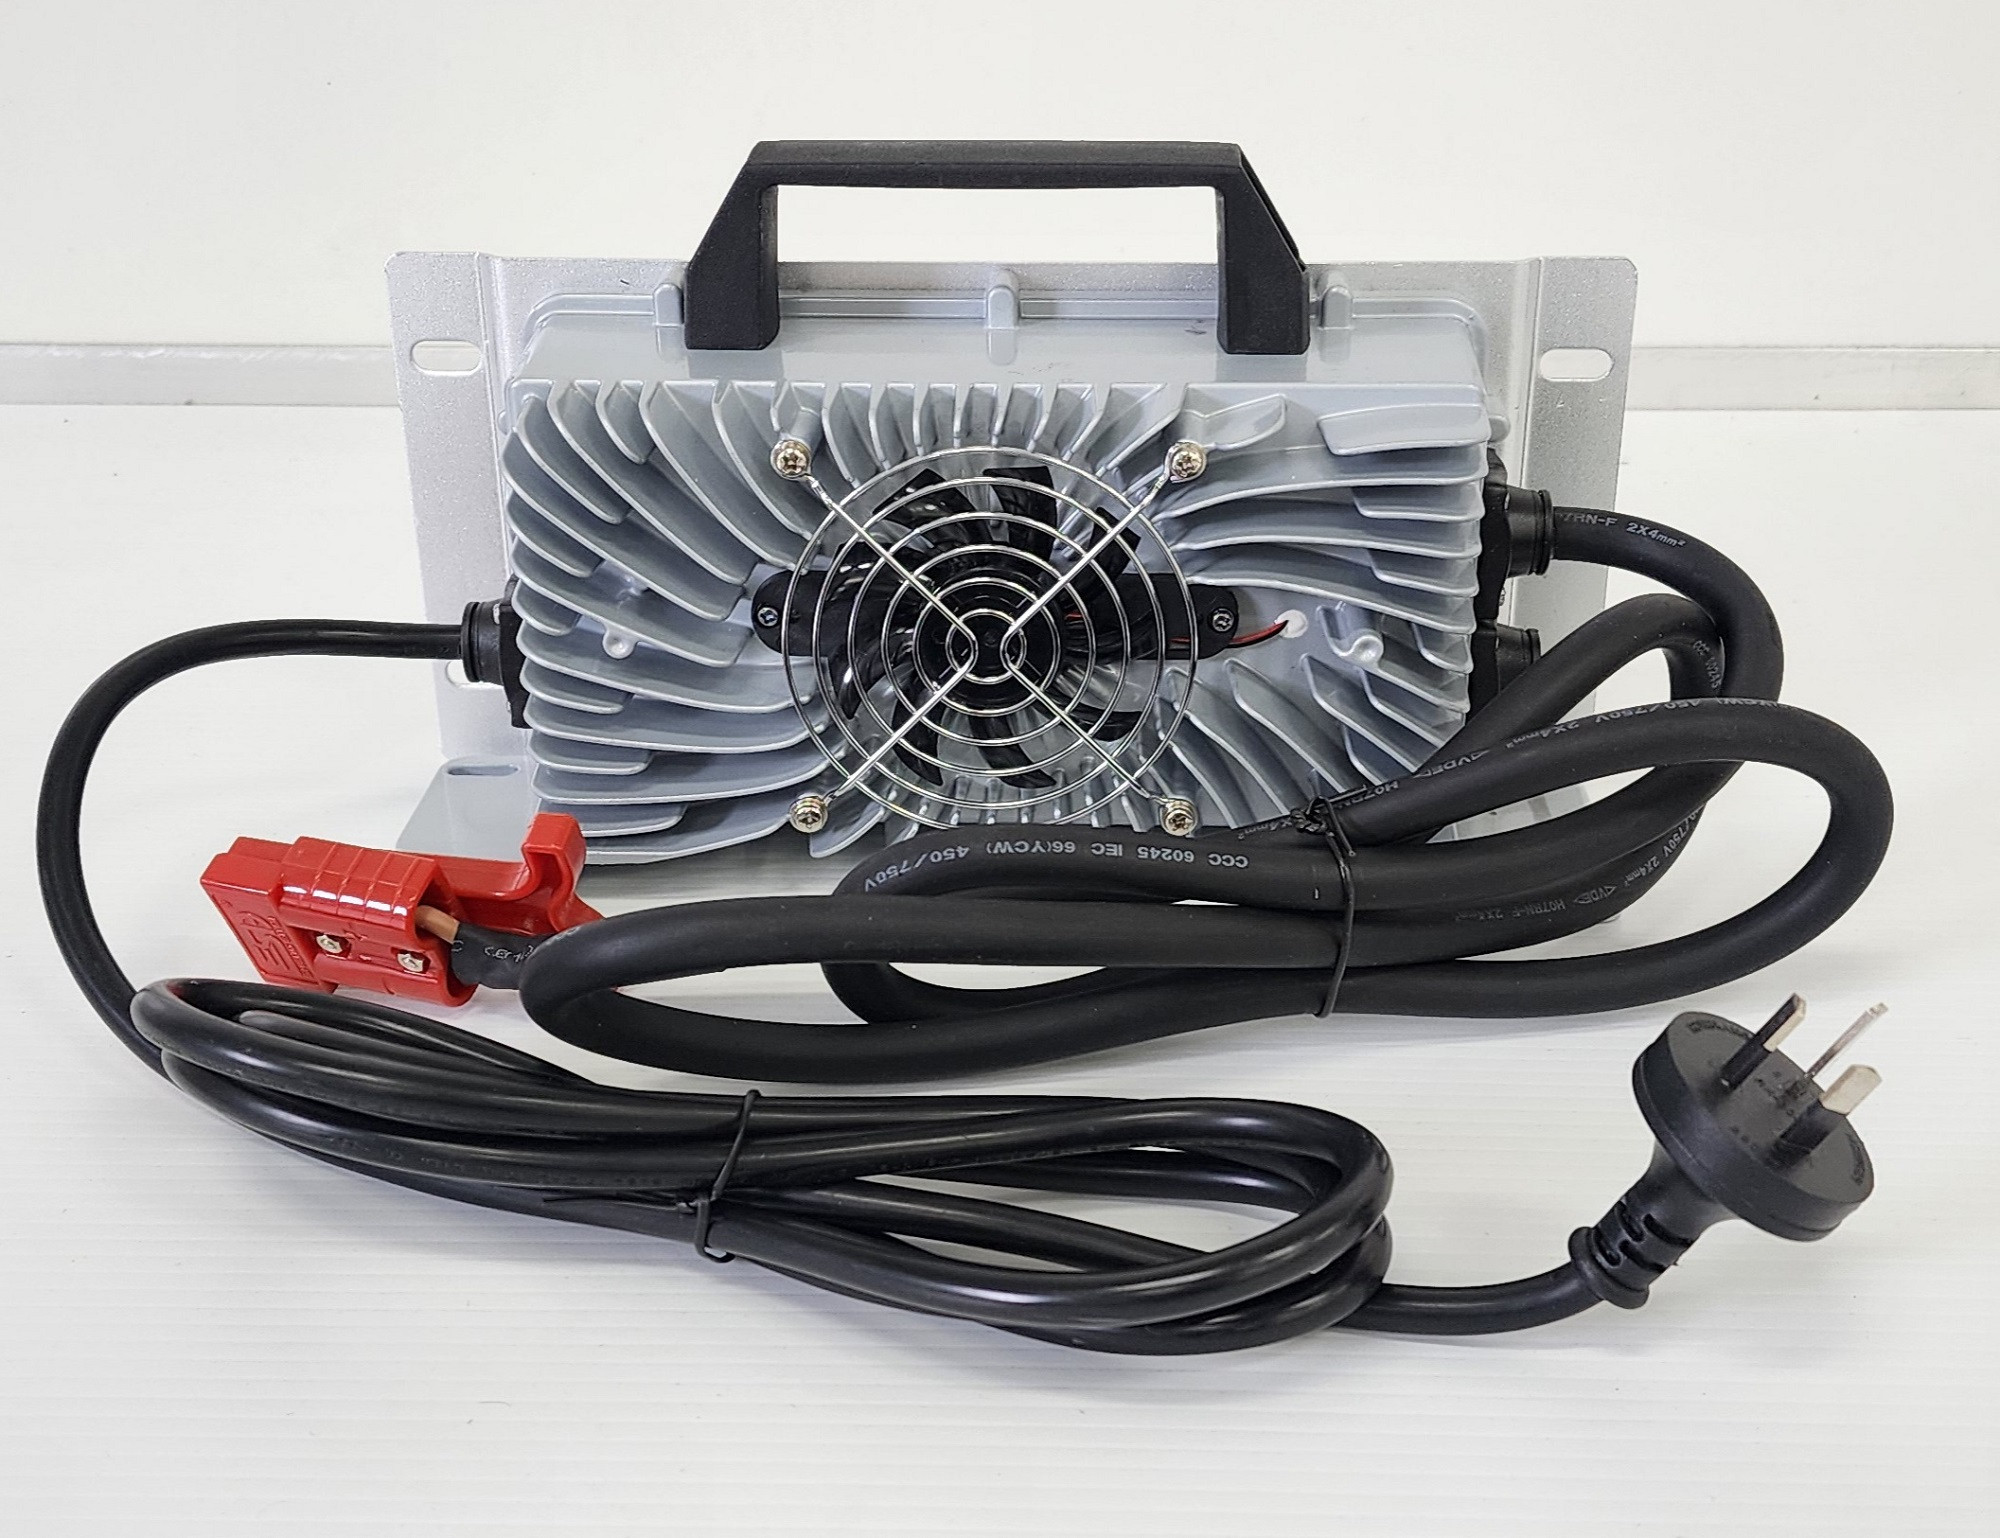 88.2V 15A Waterproof 21s Lithium Battery Charger 1